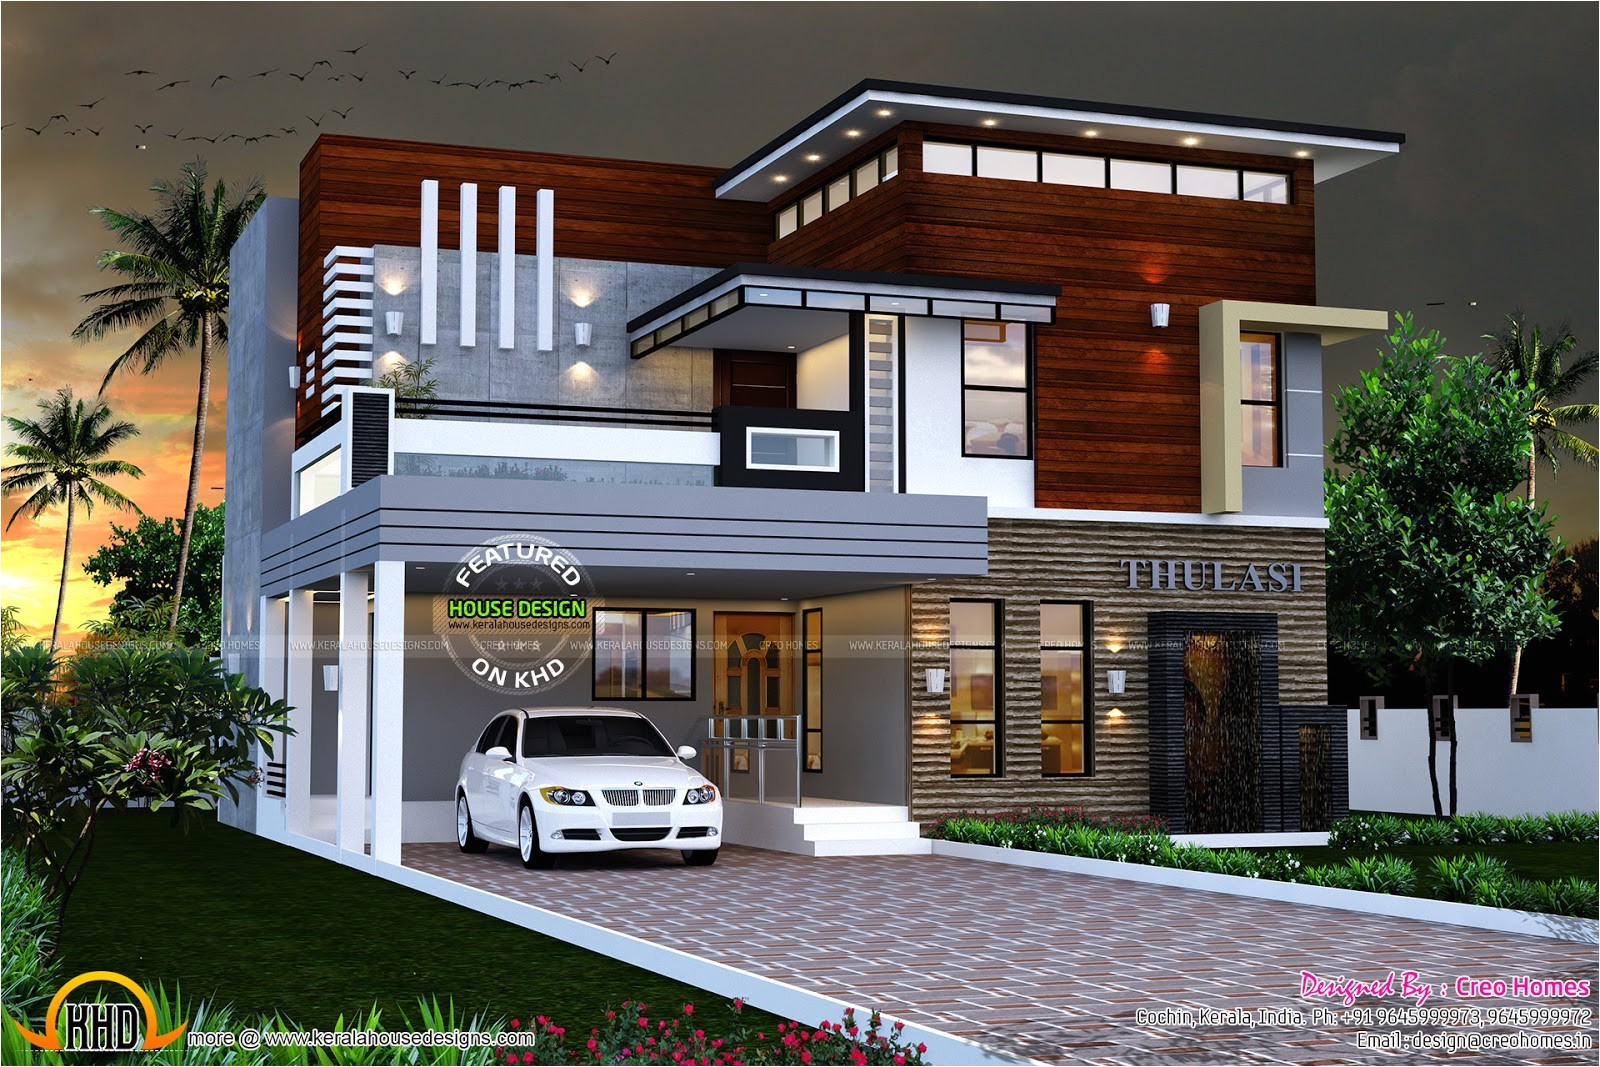 Kerala Home Designs and Plans September 2015 Kerala Home Design and Floor Plans